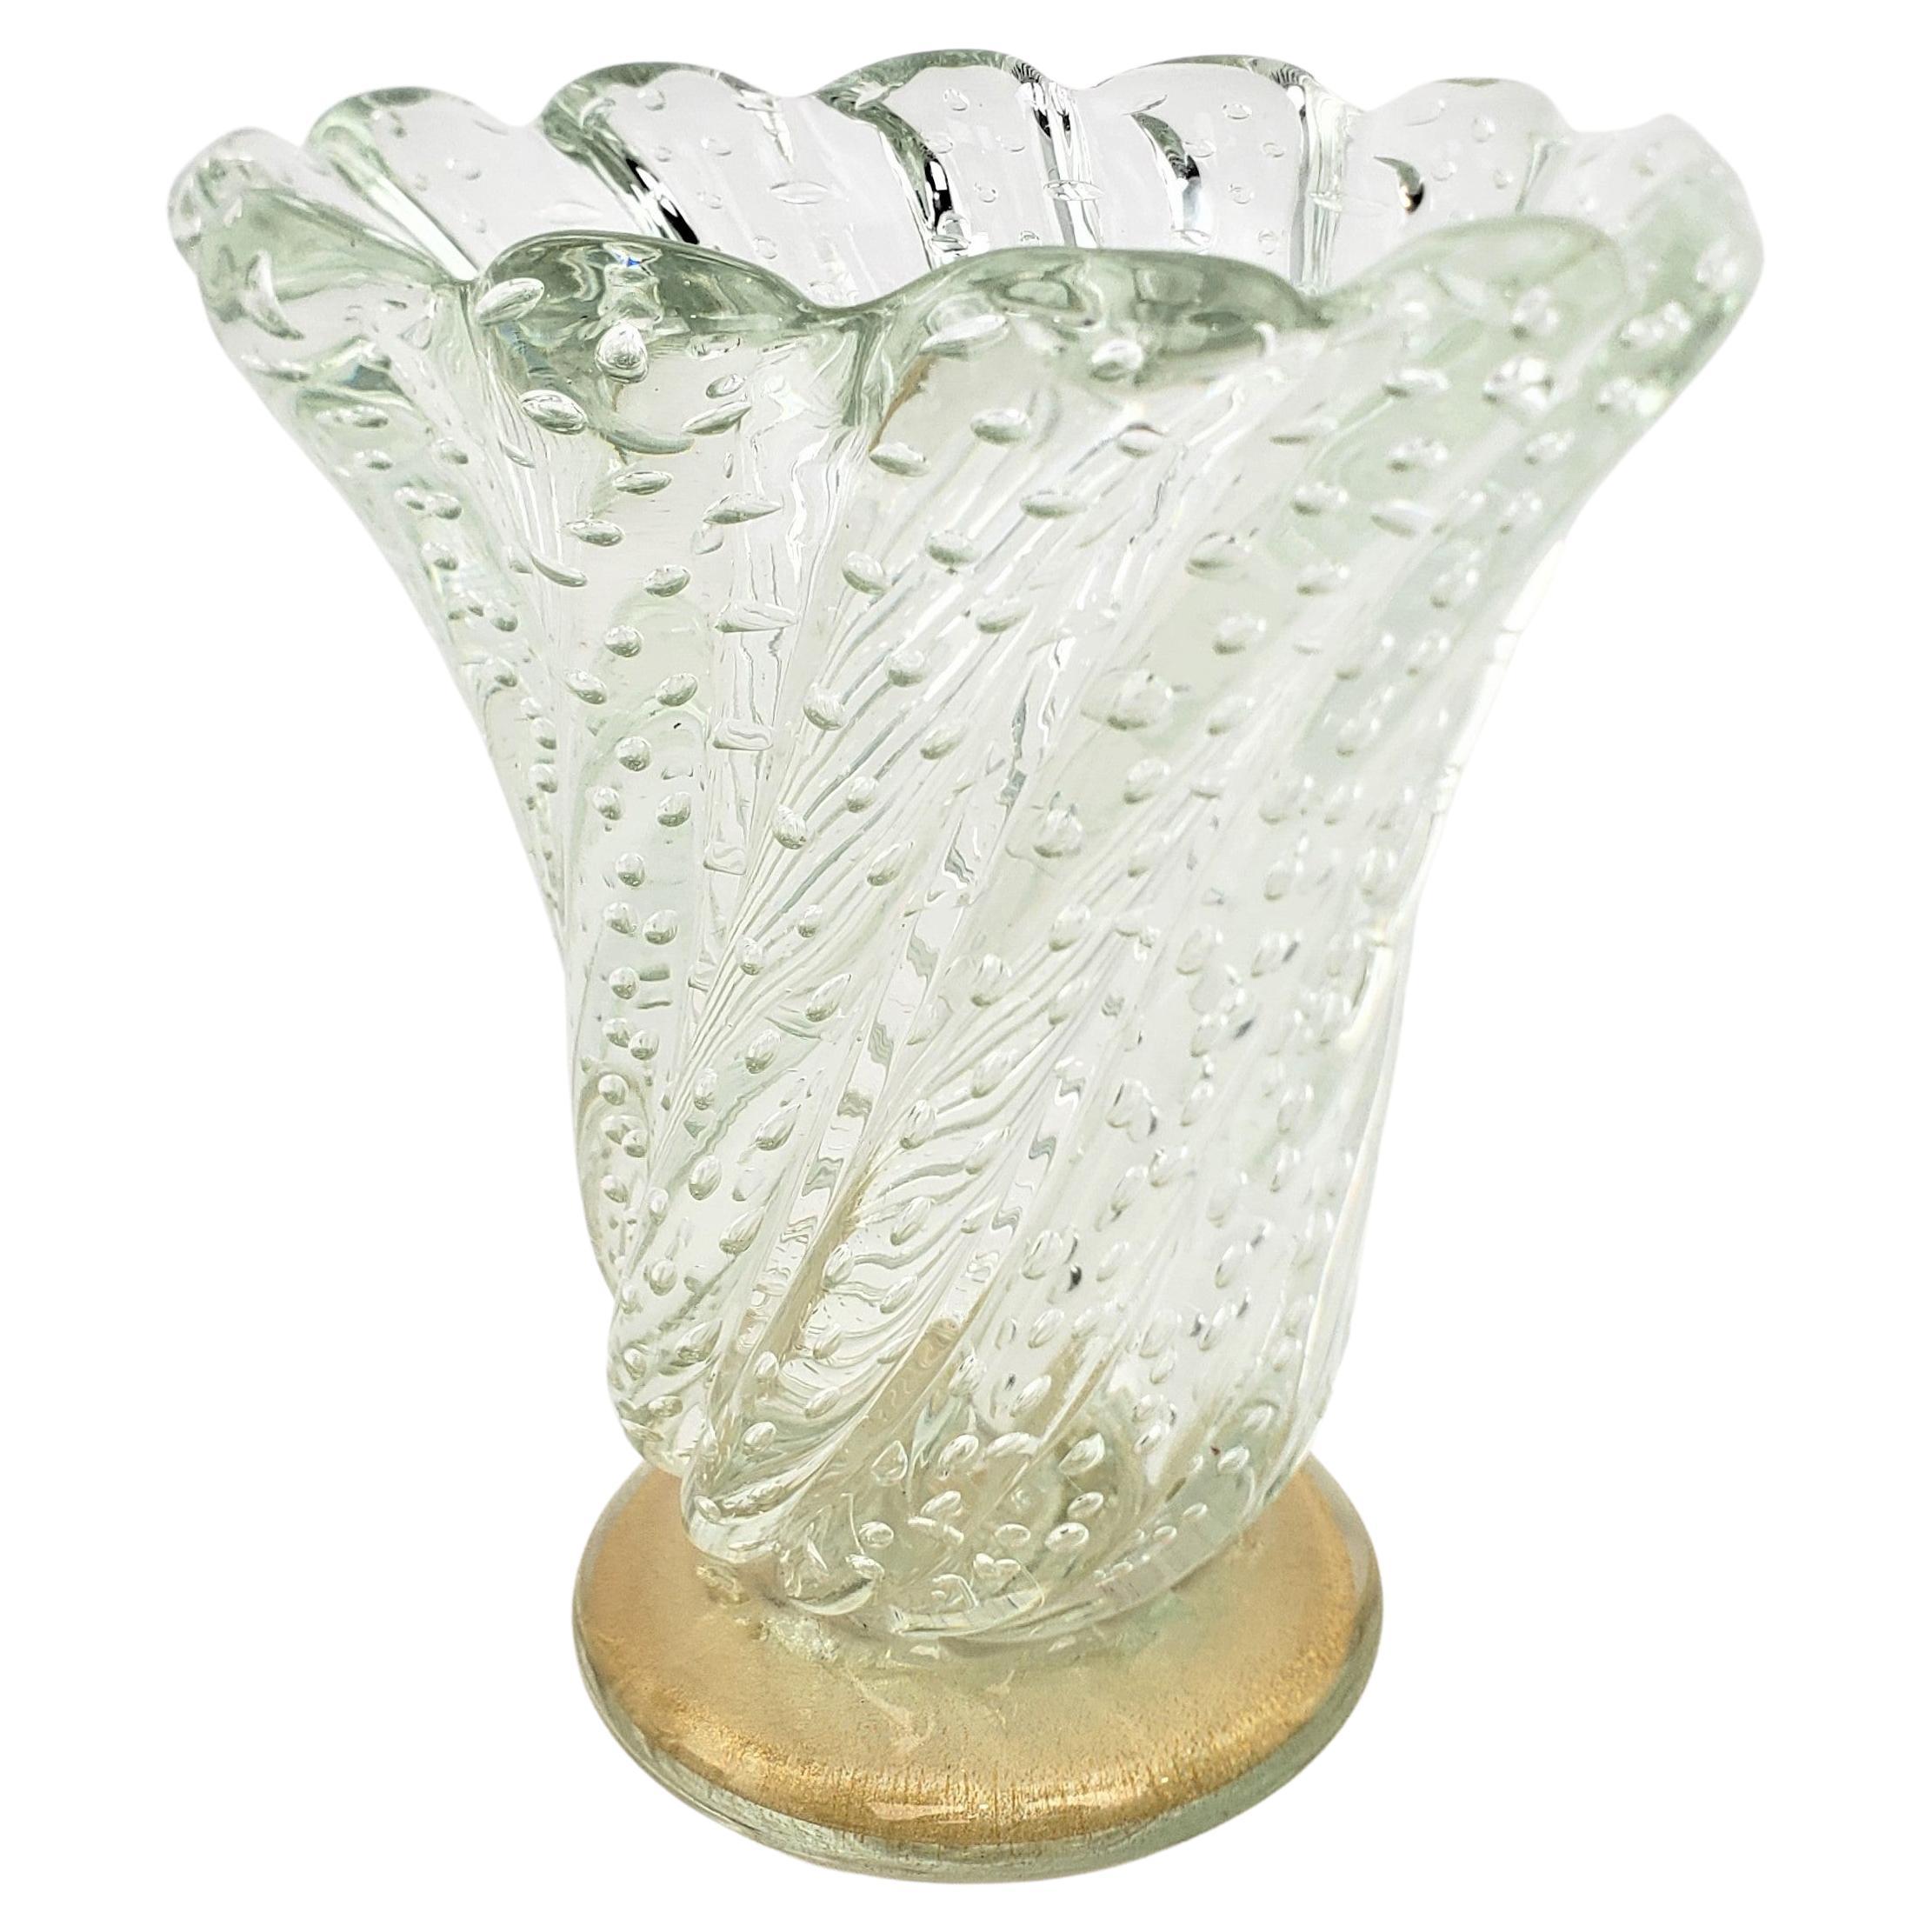 Large & Heavy Mid-Century Murano Swirled Art Glass Vase with Controlled Bubbles For Sale